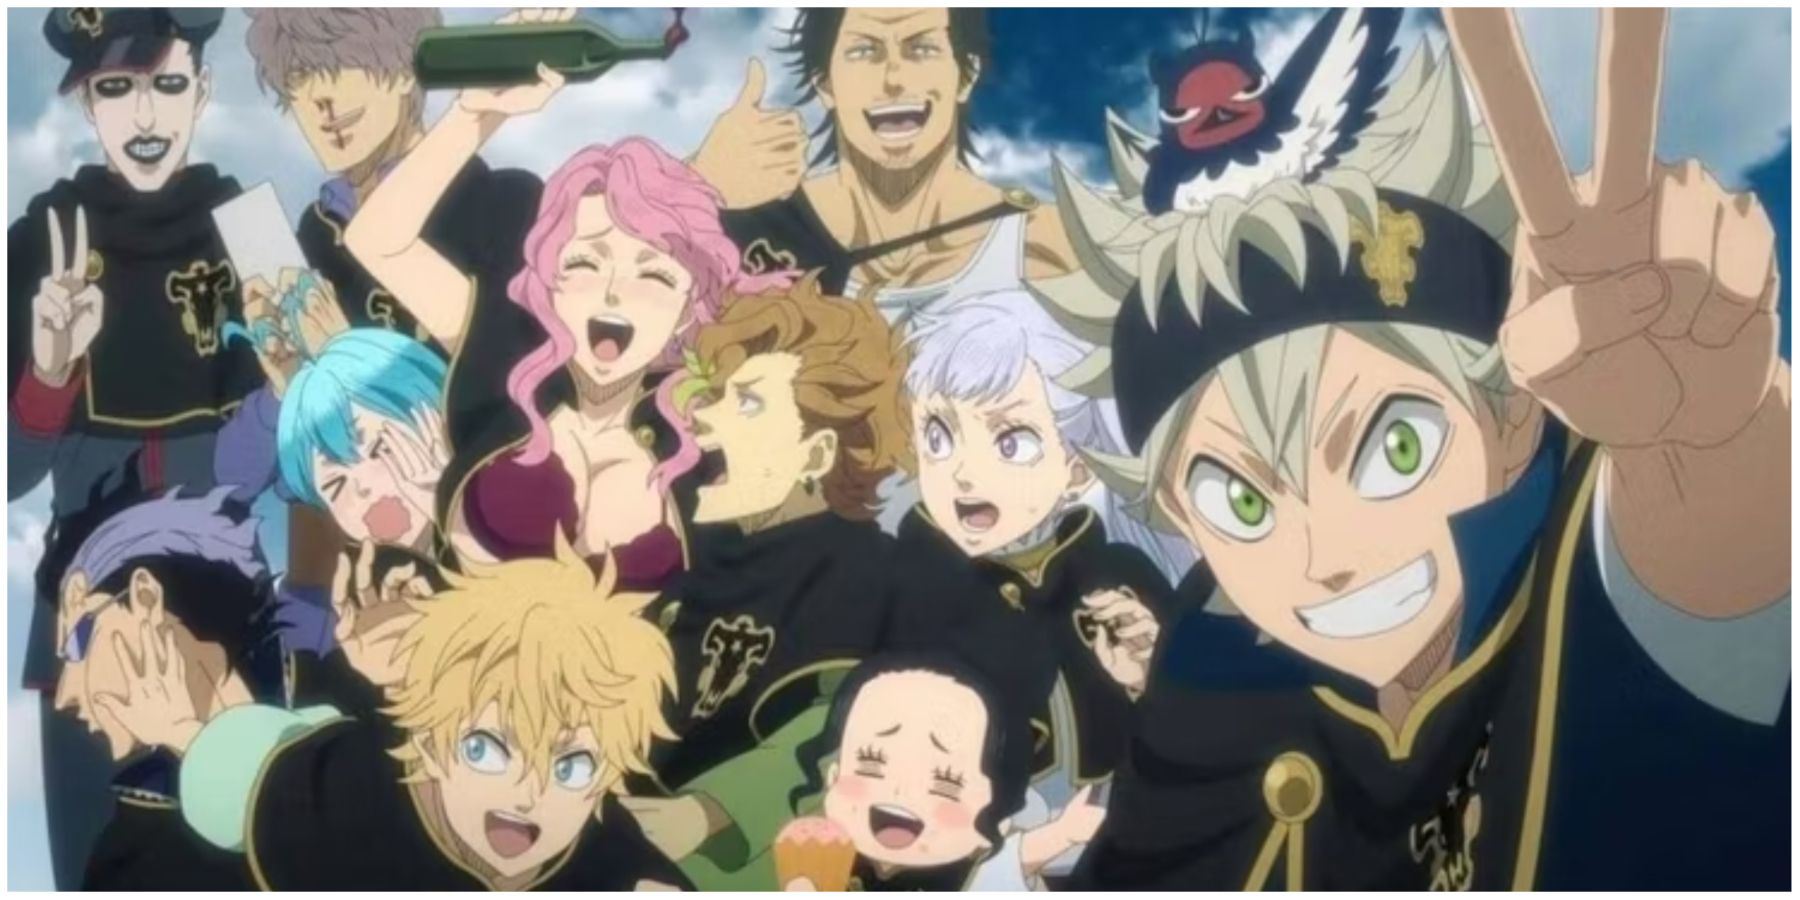 Asta & Other Black Clover Characters